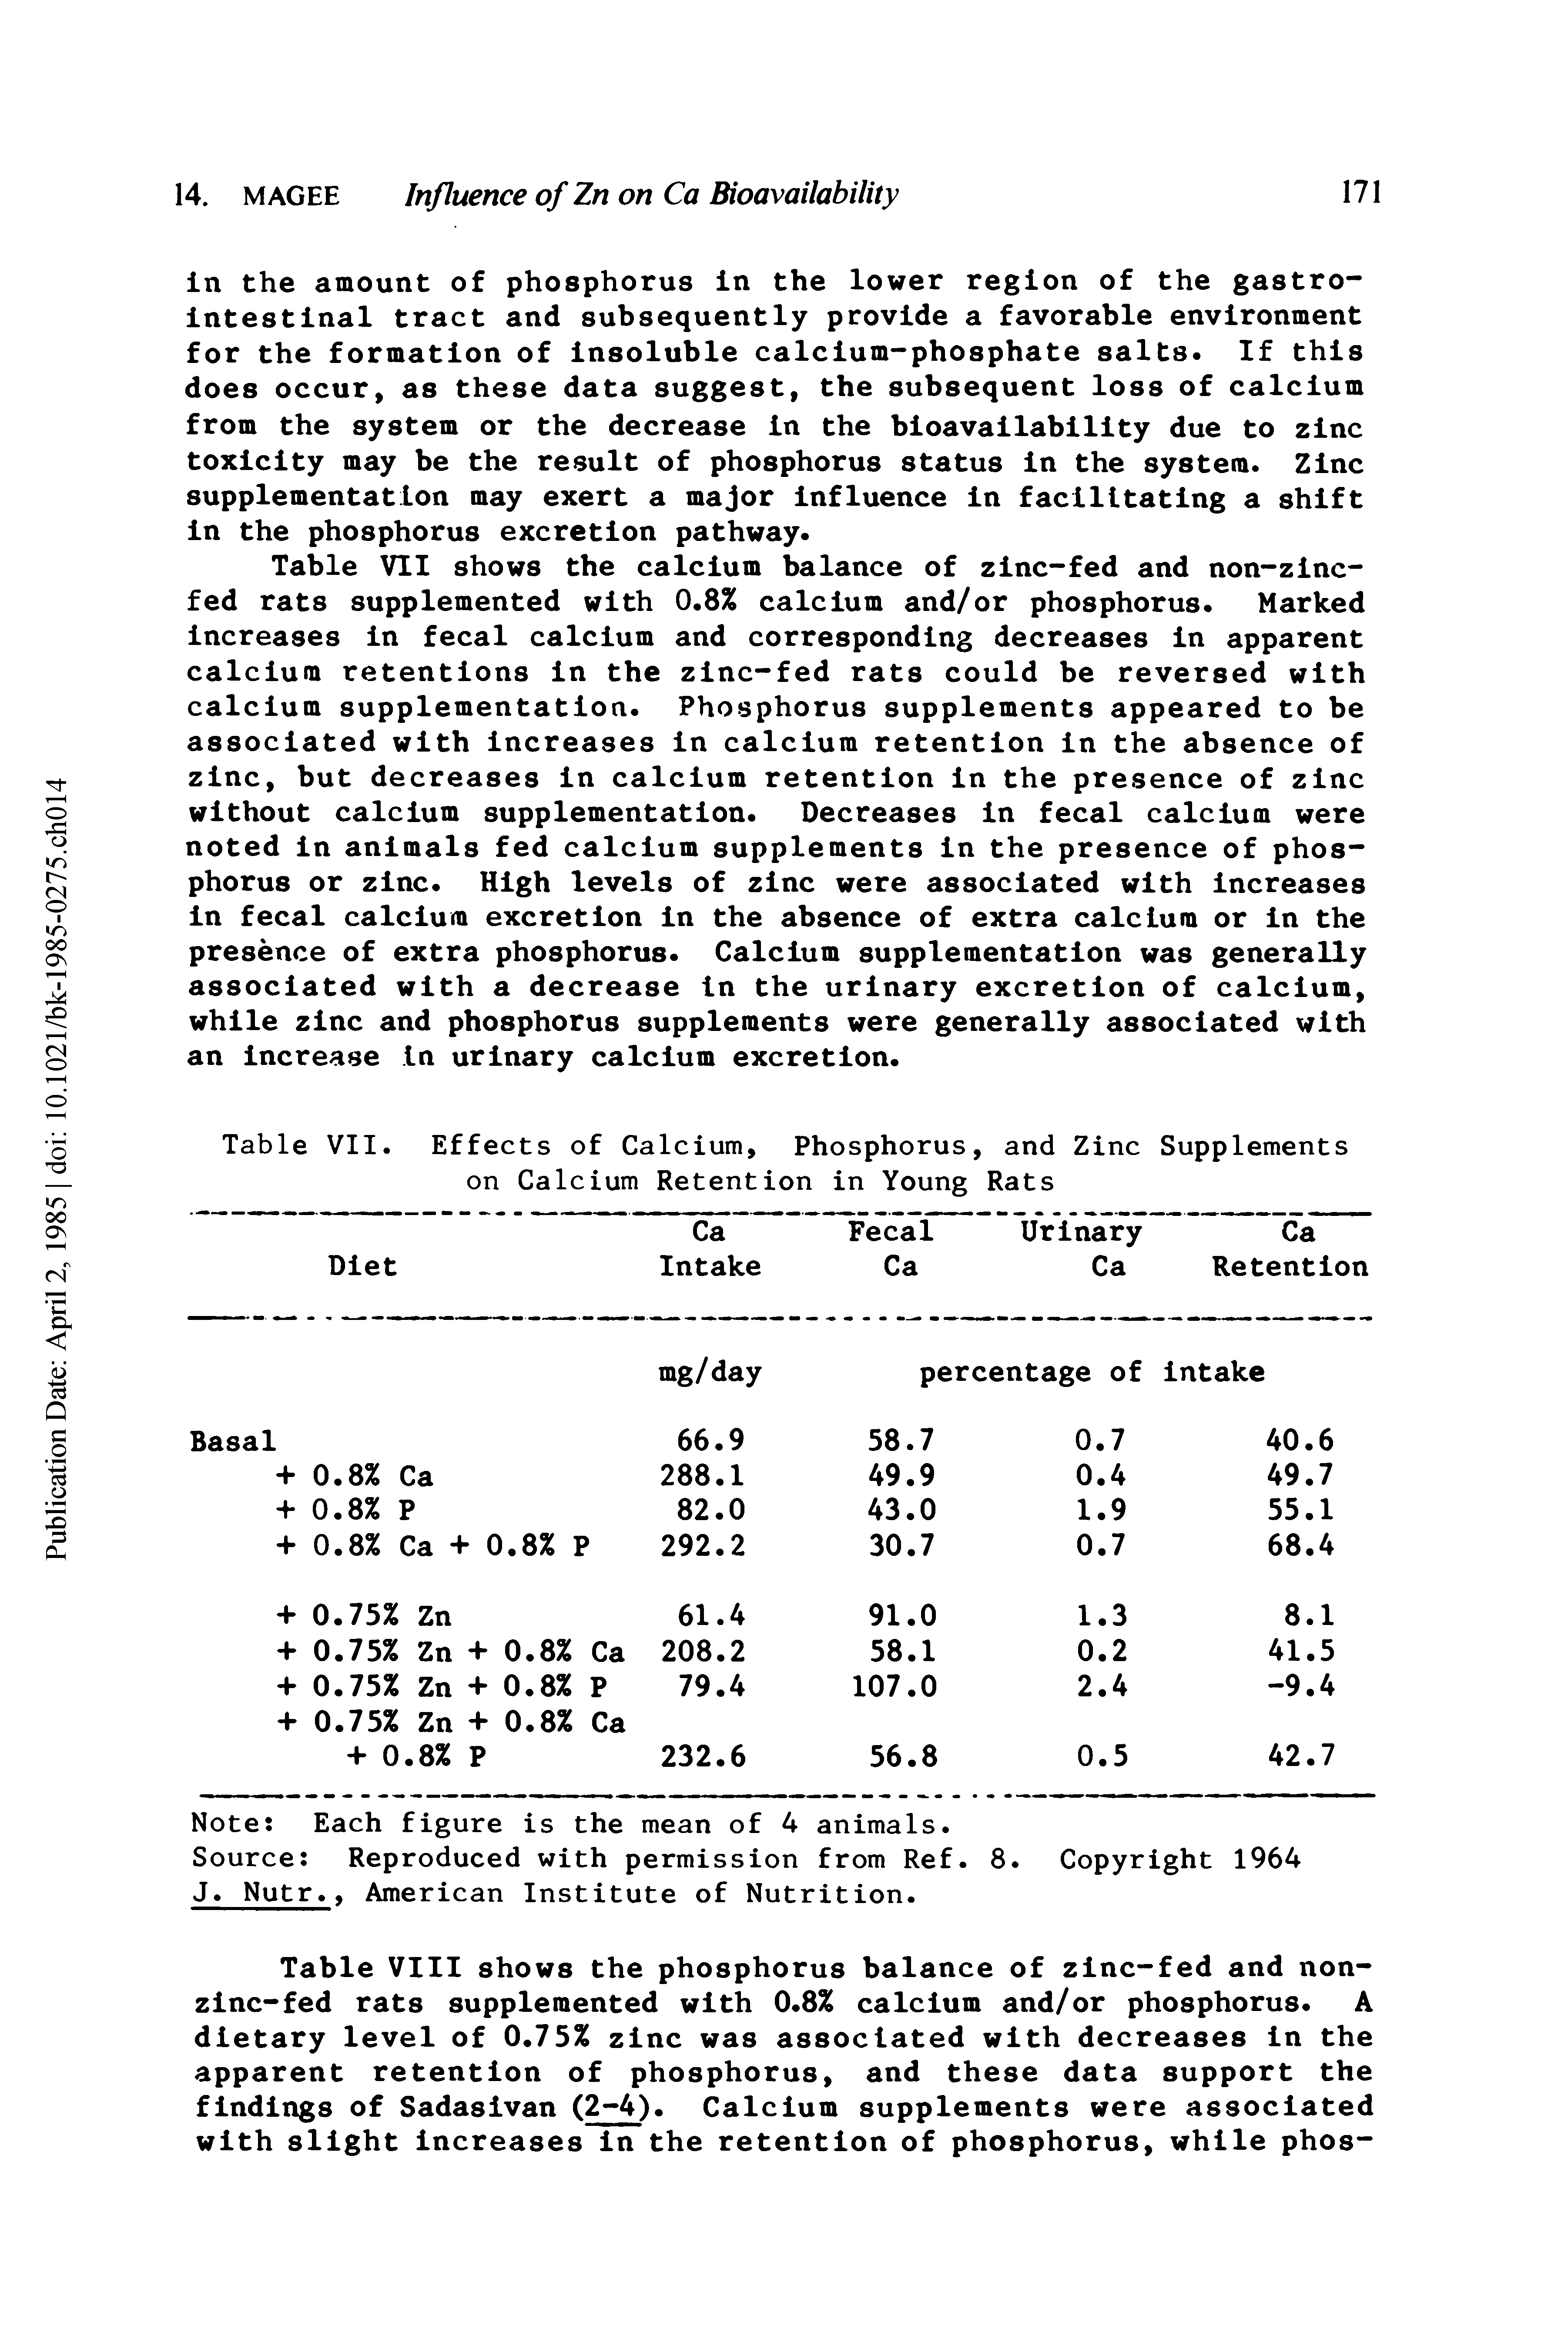 Table VIII shows the phosphorus balance of zinc-fed and non-zinc-fed rats supplemented with 0.8% calcium and/or phosphorus. A dietary level of 0.75% zinc was associated with decreases in the apparent retention of phosphorus, and these data support the findings of Sadasivan (2-4). Calcium supplements were associated with slight increases in the retention of phosphorus, while phos-...